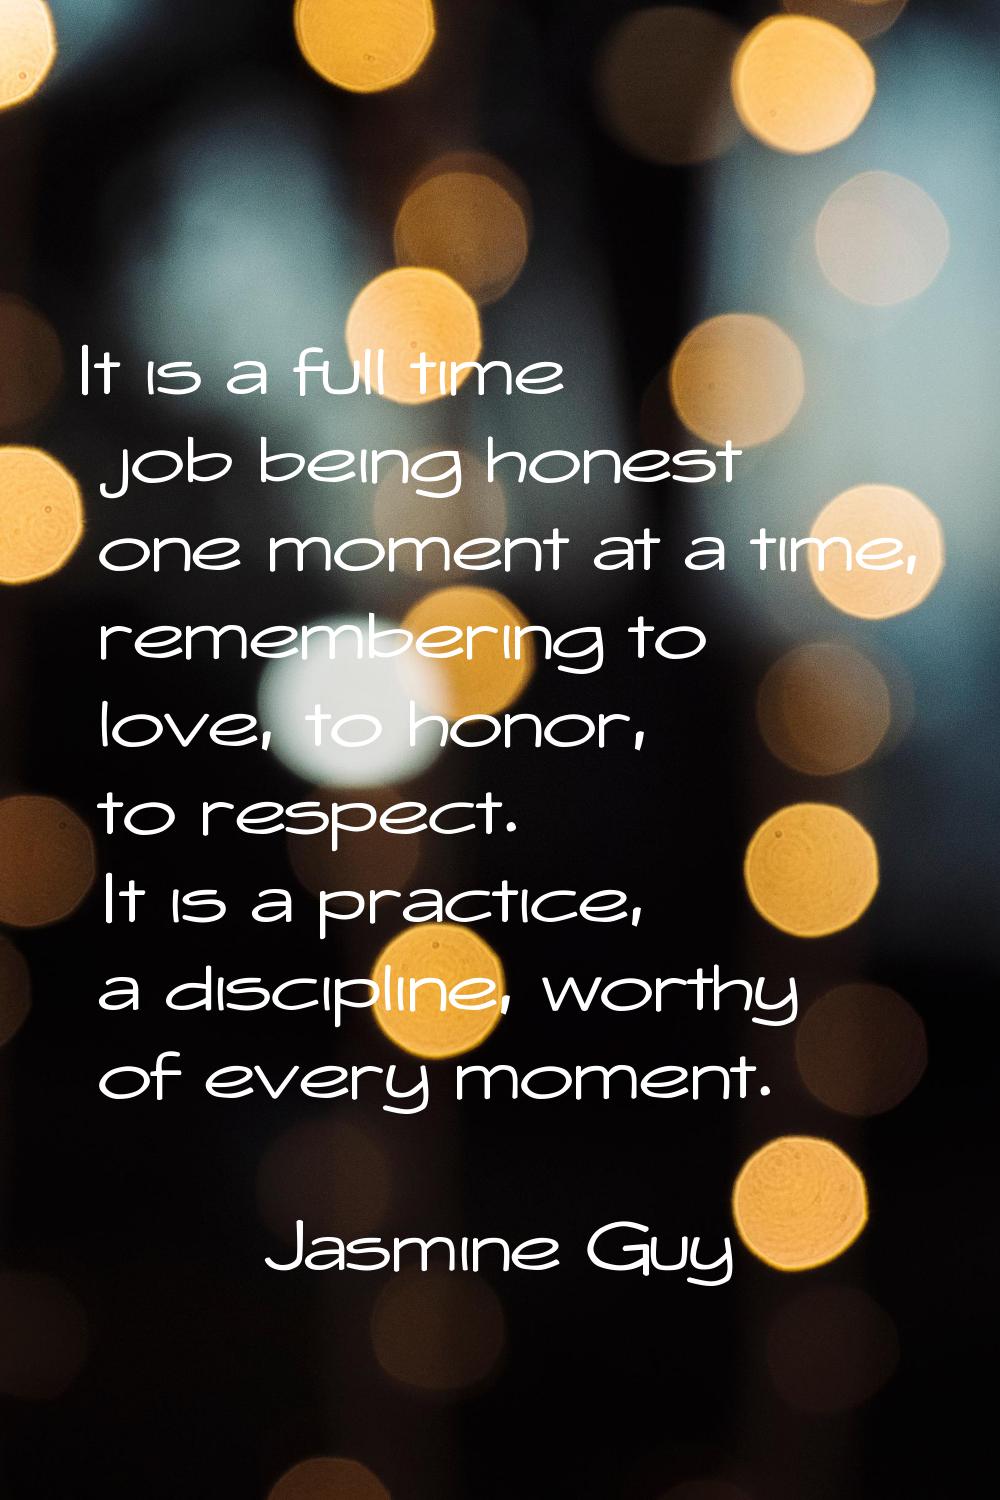 It is a full time job being honest one moment at a time, remembering to love, to honor, to respect.